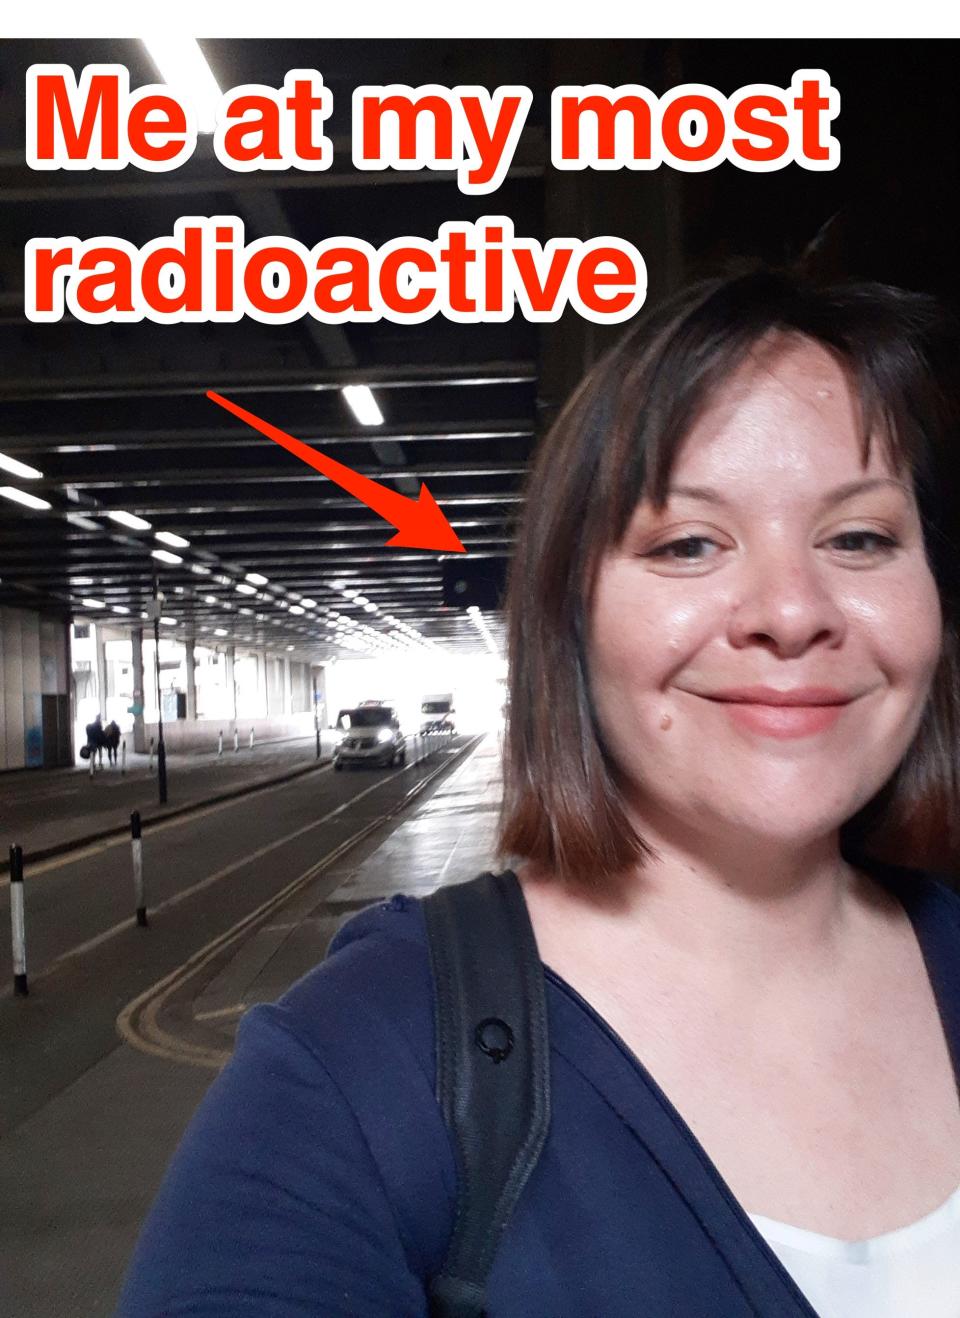 A picture shows Marianne Guenot walking in a tunnel in London. An arrow says "me at my most radioactive"